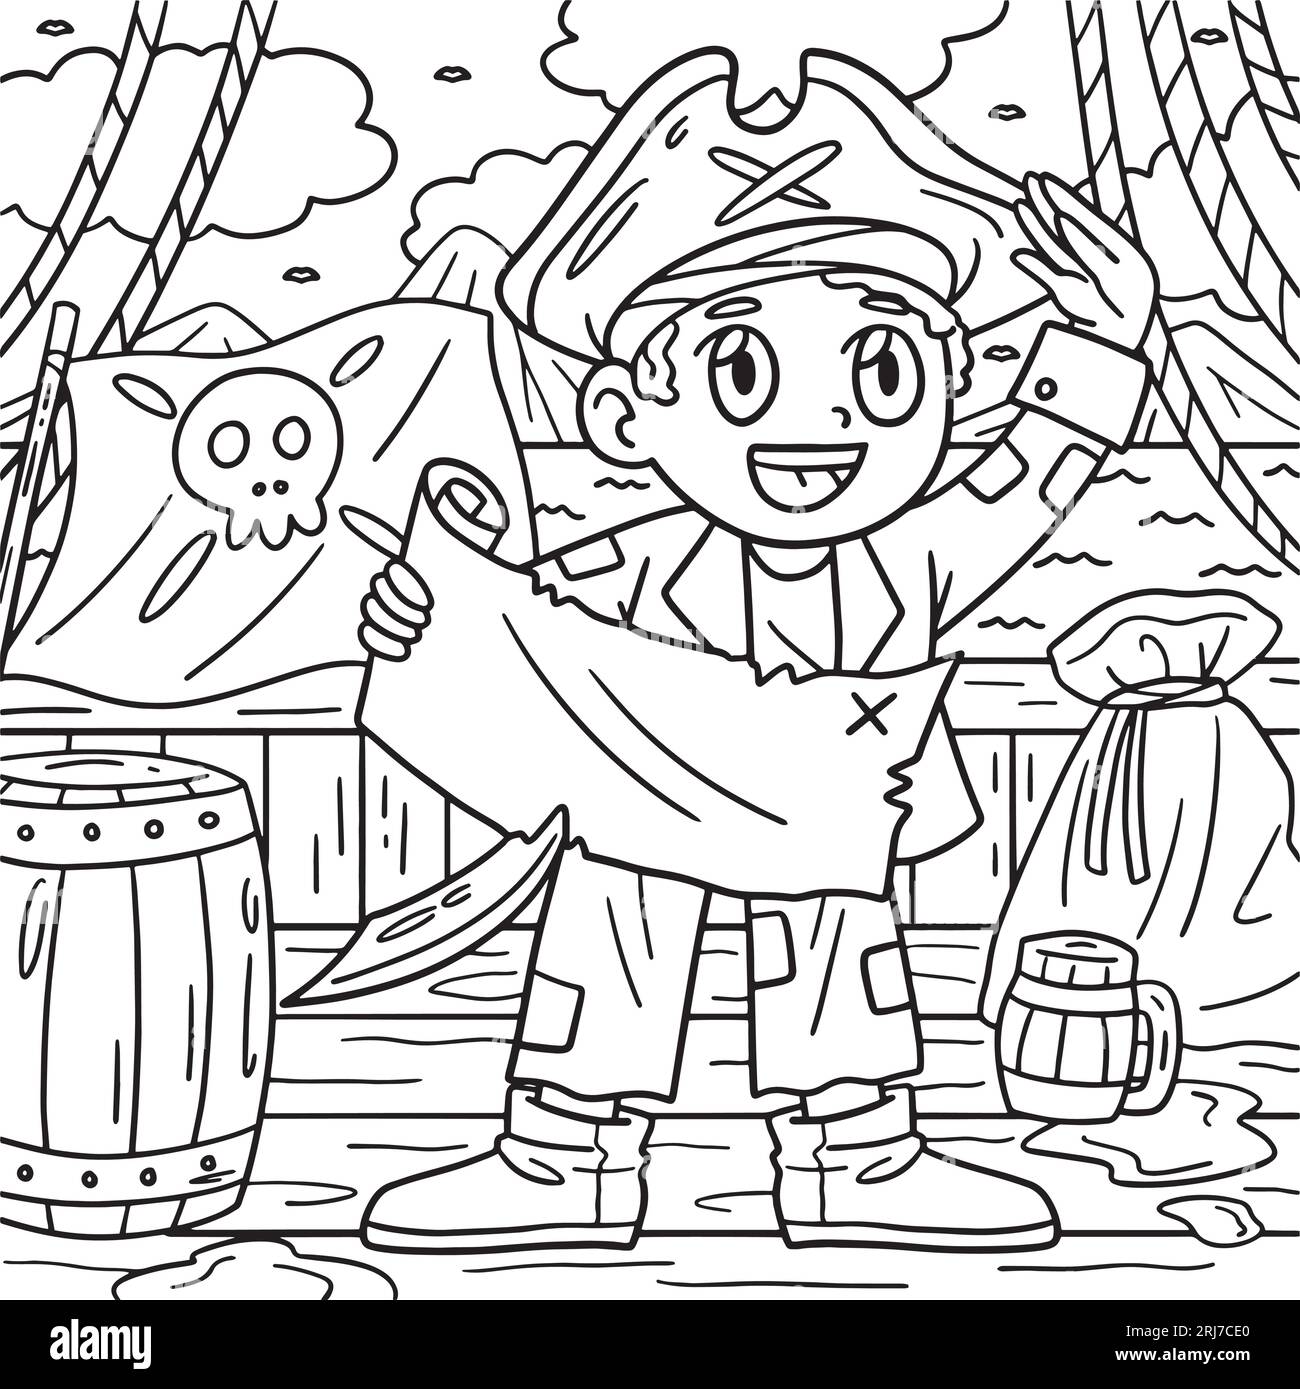 Pirate with treasure map coloring page for kids stock vector image art